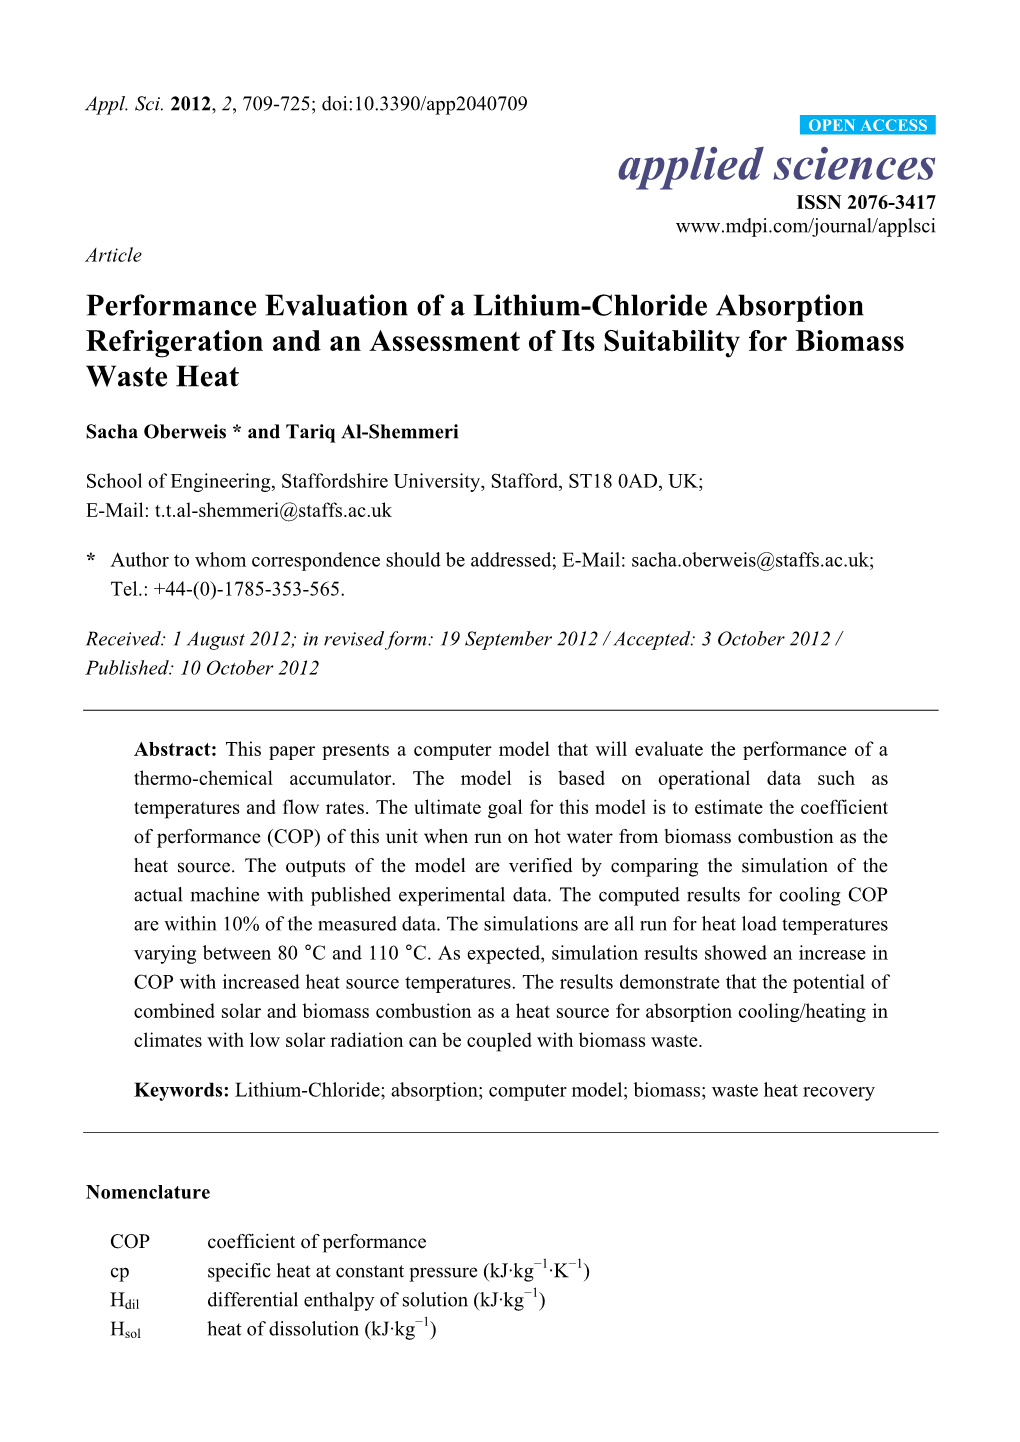 Performance Evaluation of a Lithium-Chloride Absorption Refrigeration and an Assessment of Its Suitability for Biomass Waste Heat